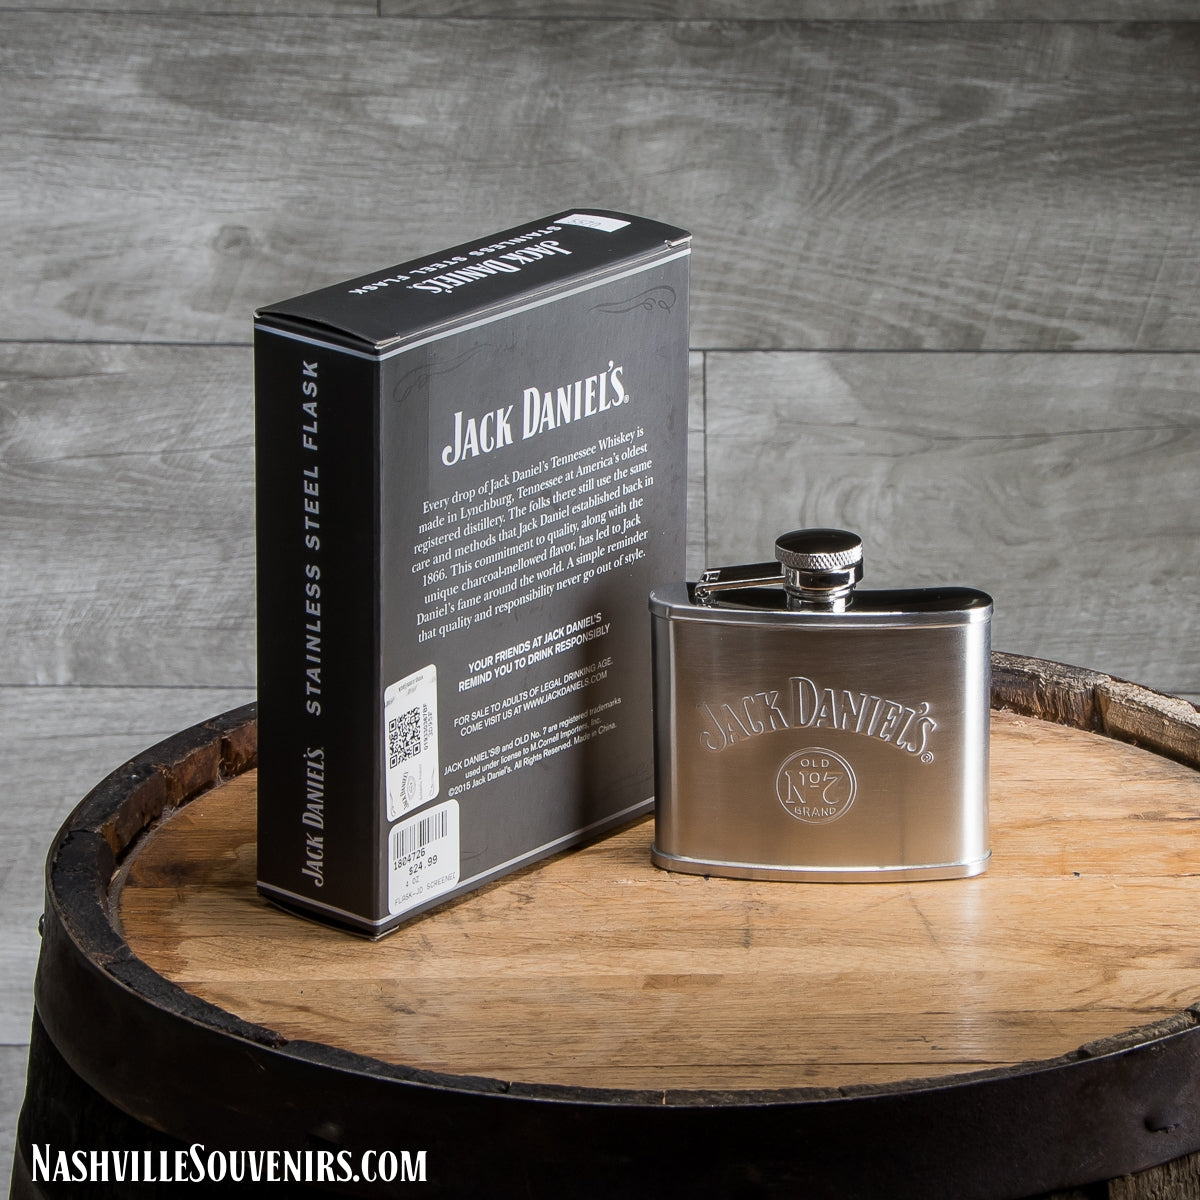 Officially licensed Jack Daniels Old No.7 Stainless Flask.  FREE SHIPPING on all US orders over $75!